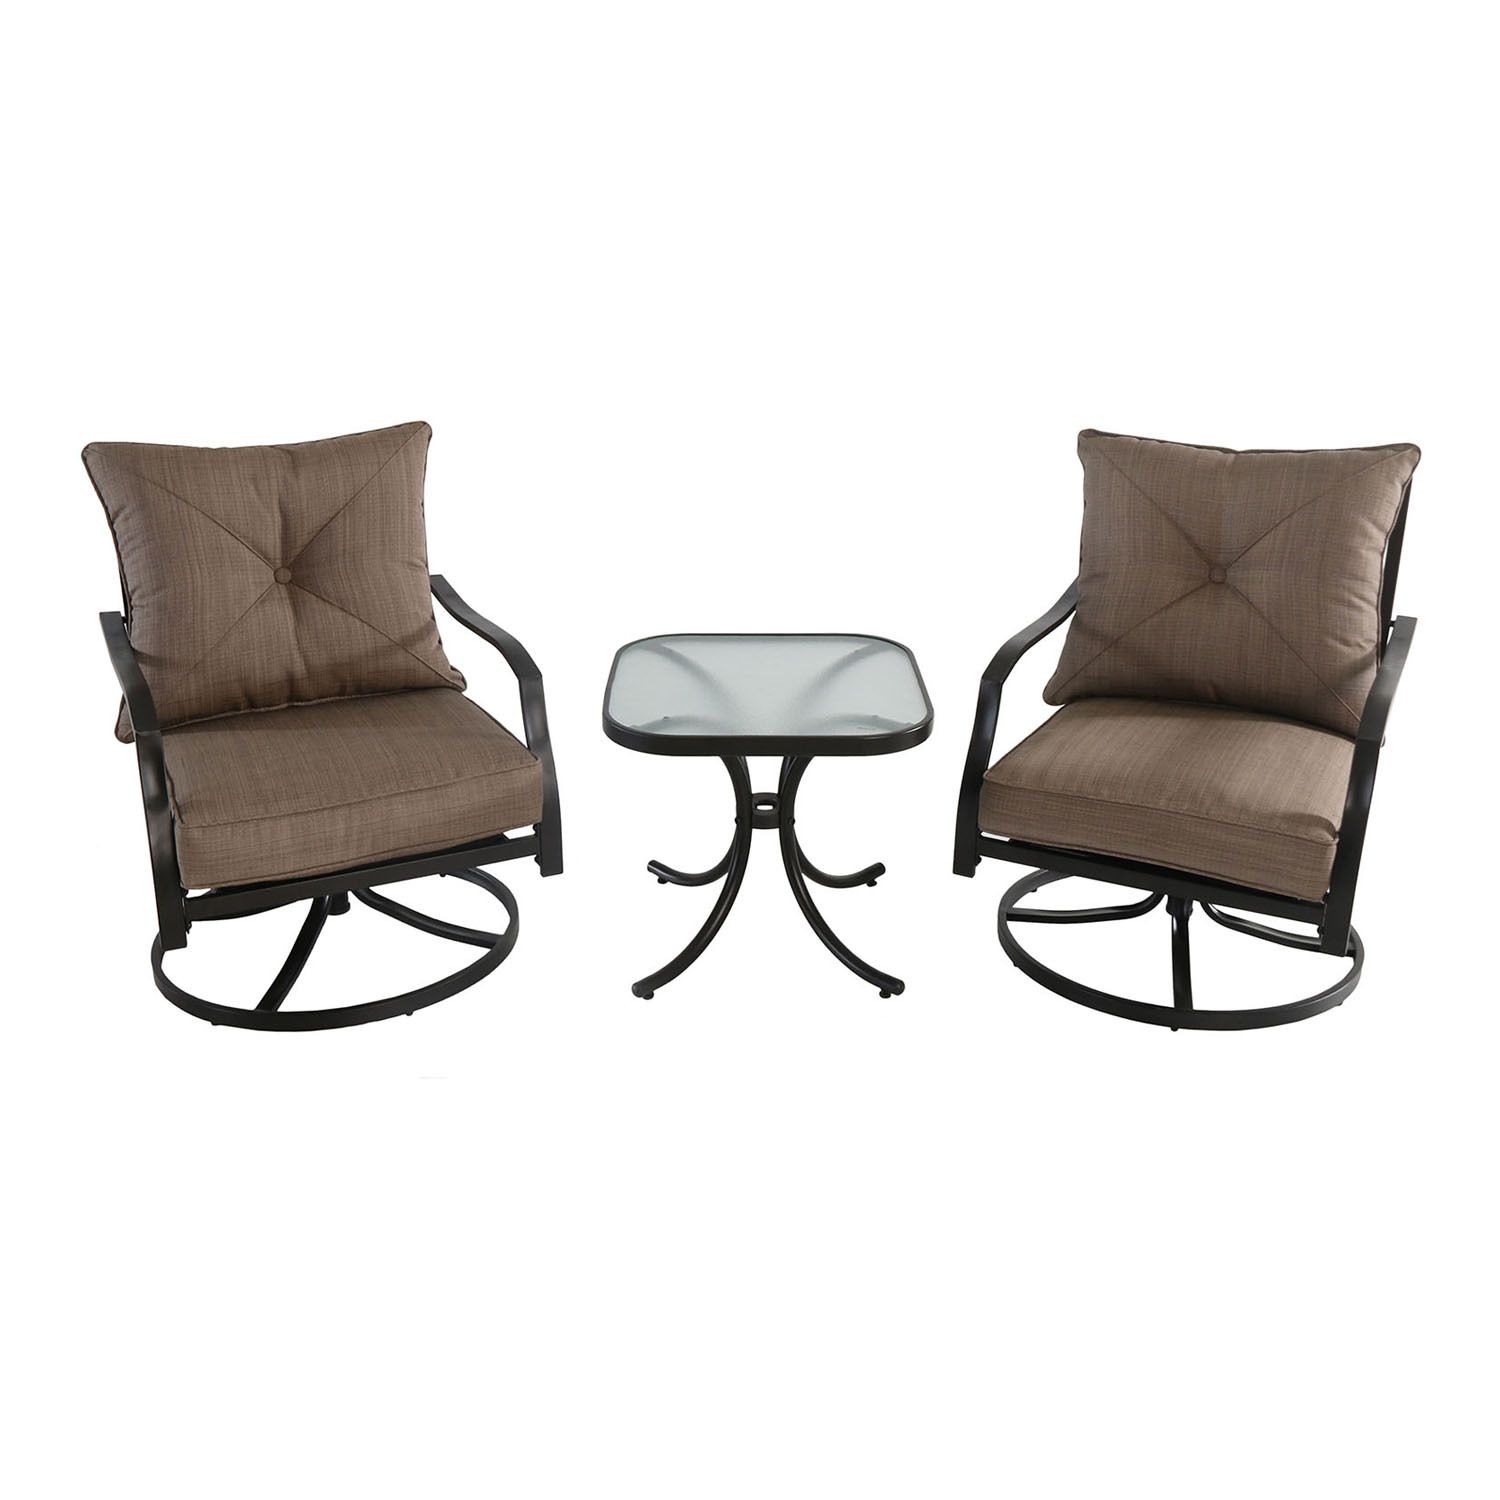 Image for Hanover Accessories Palm Bay Swivel Chat Arm Chair 3-piece Set at Kohl's.